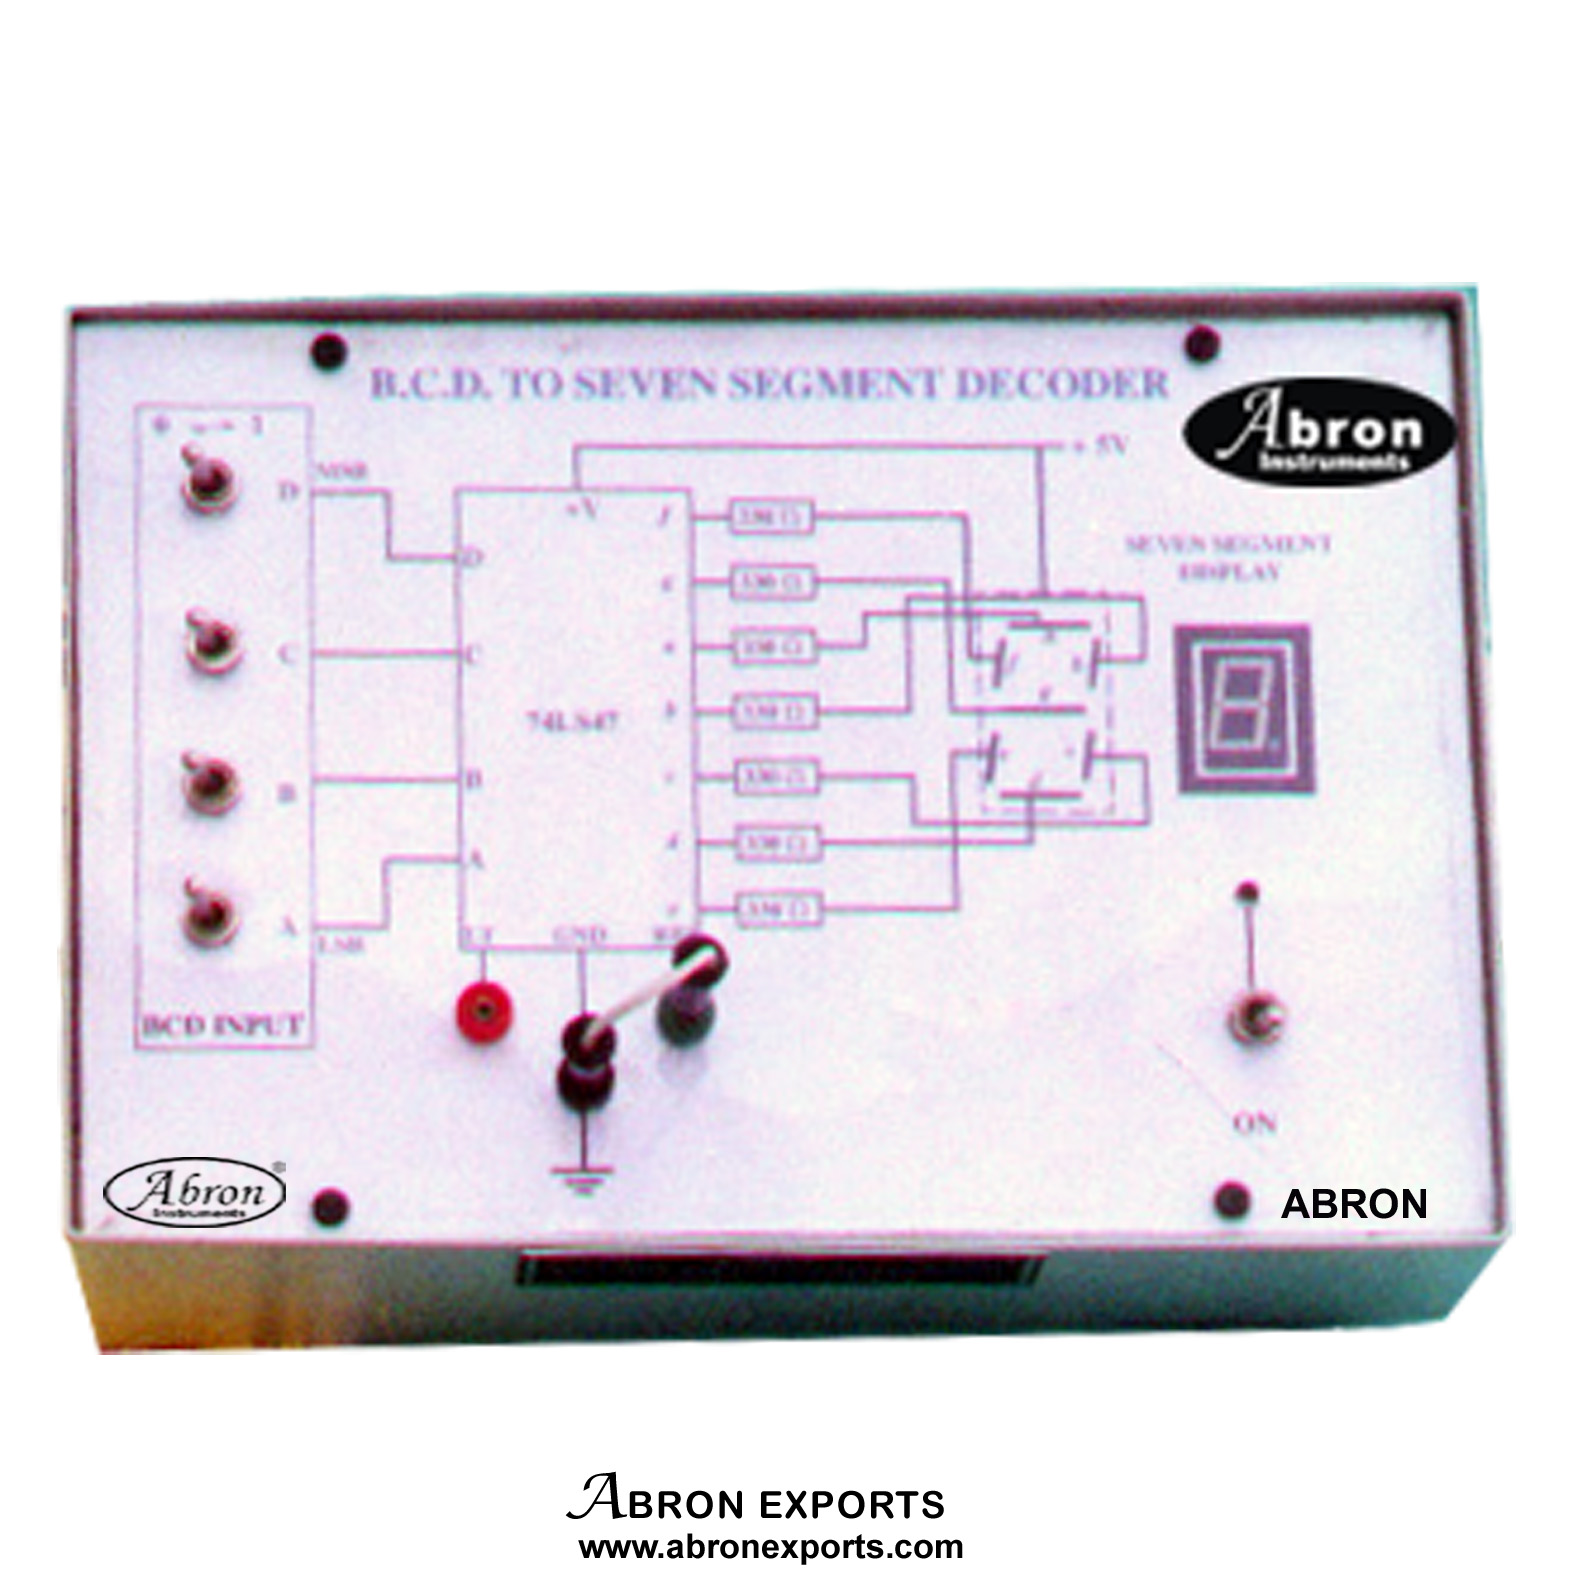 BCD to Seven Segment logic Gates Digital ETB Electronic Trainer Board With Circuit Sockets Power Supply Abron AE-1210B